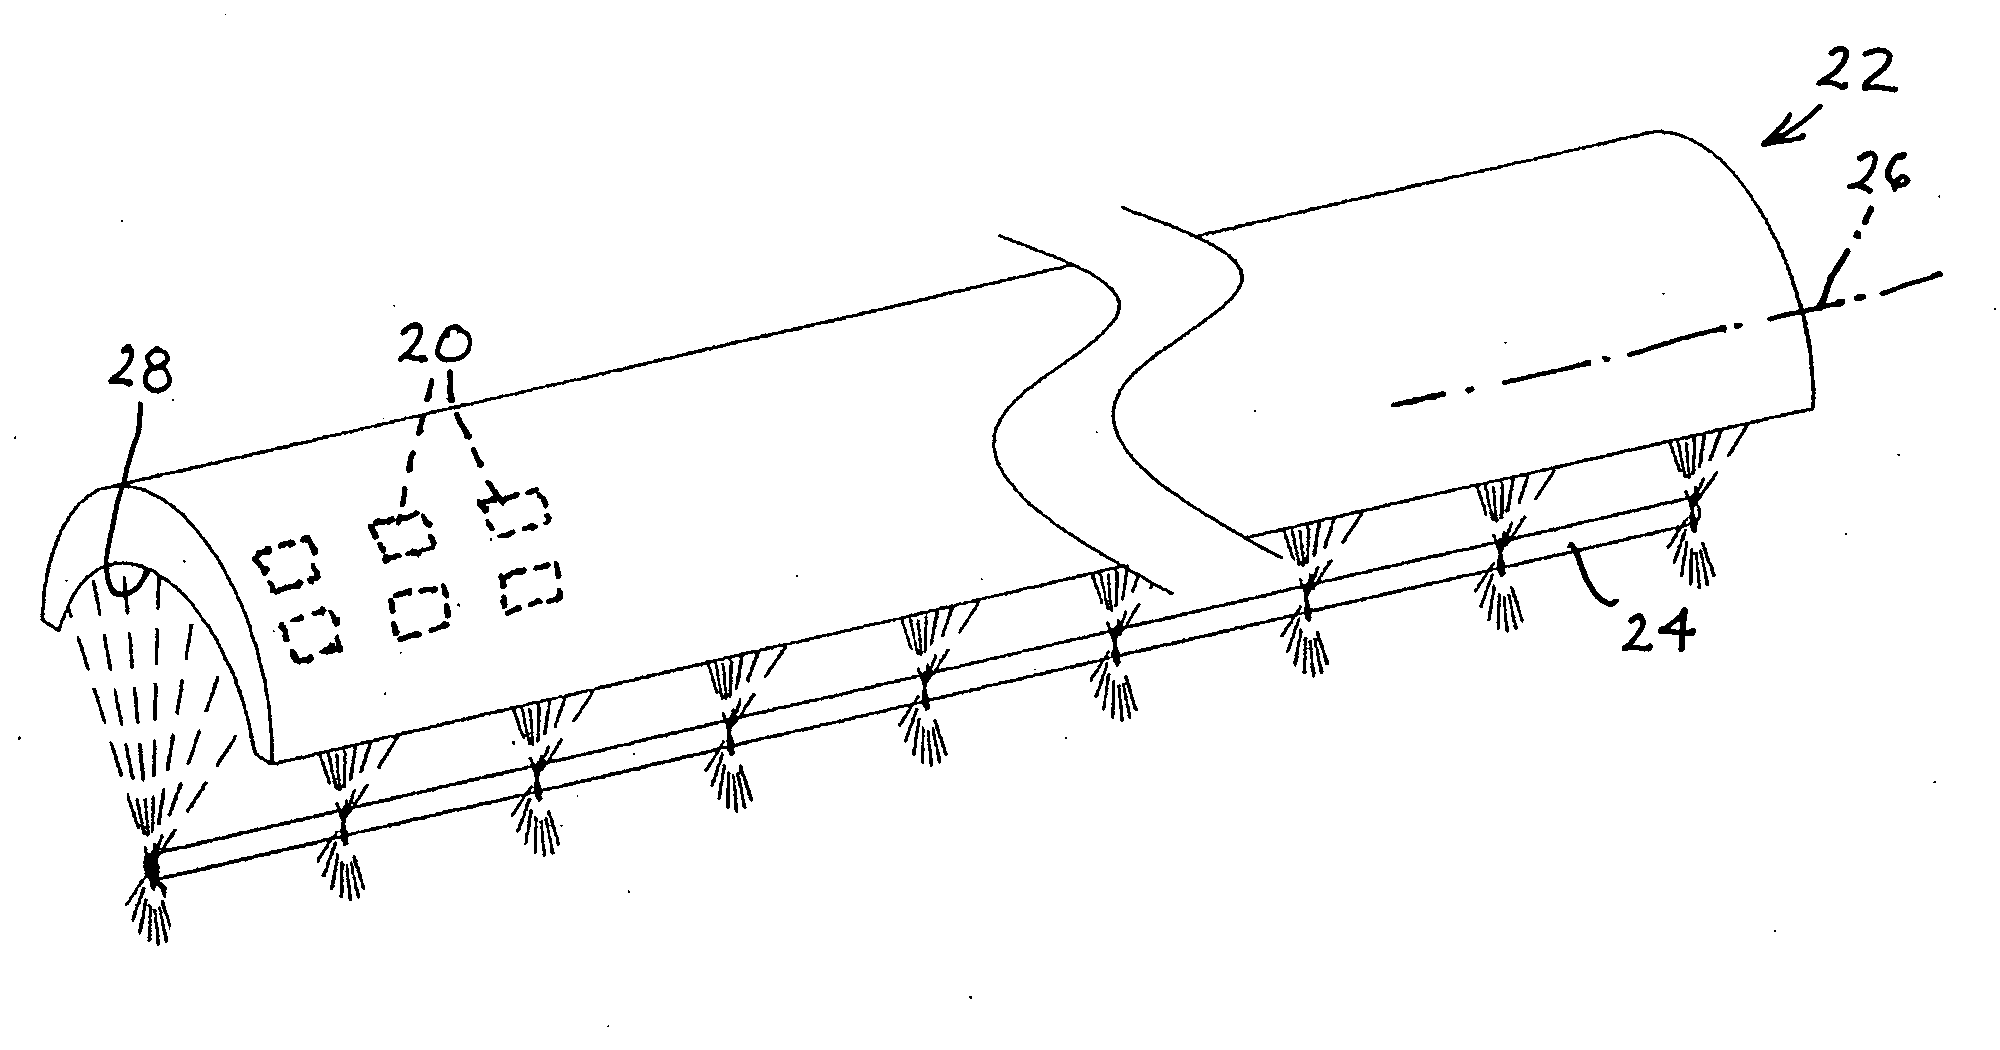 Ultrasonic medical treatment device with variable focal zone